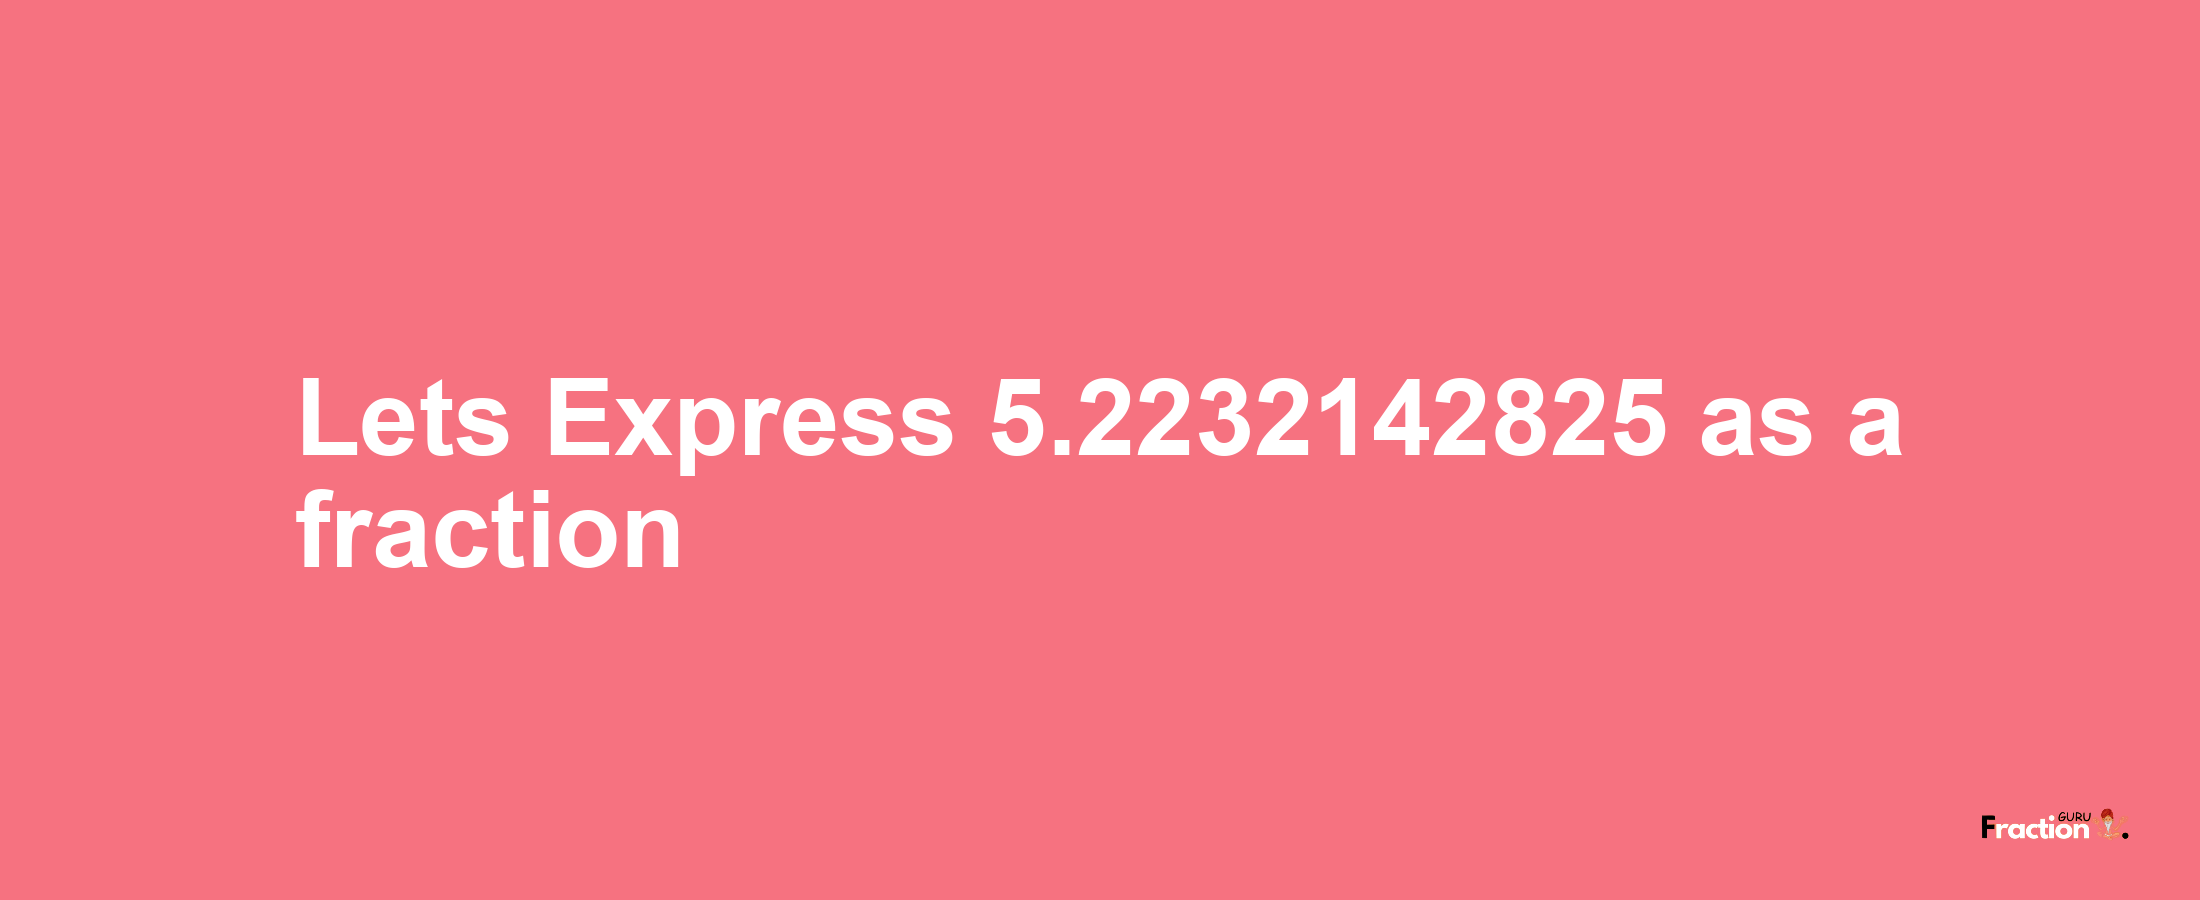 Lets Express 5.2232142825 as afraction